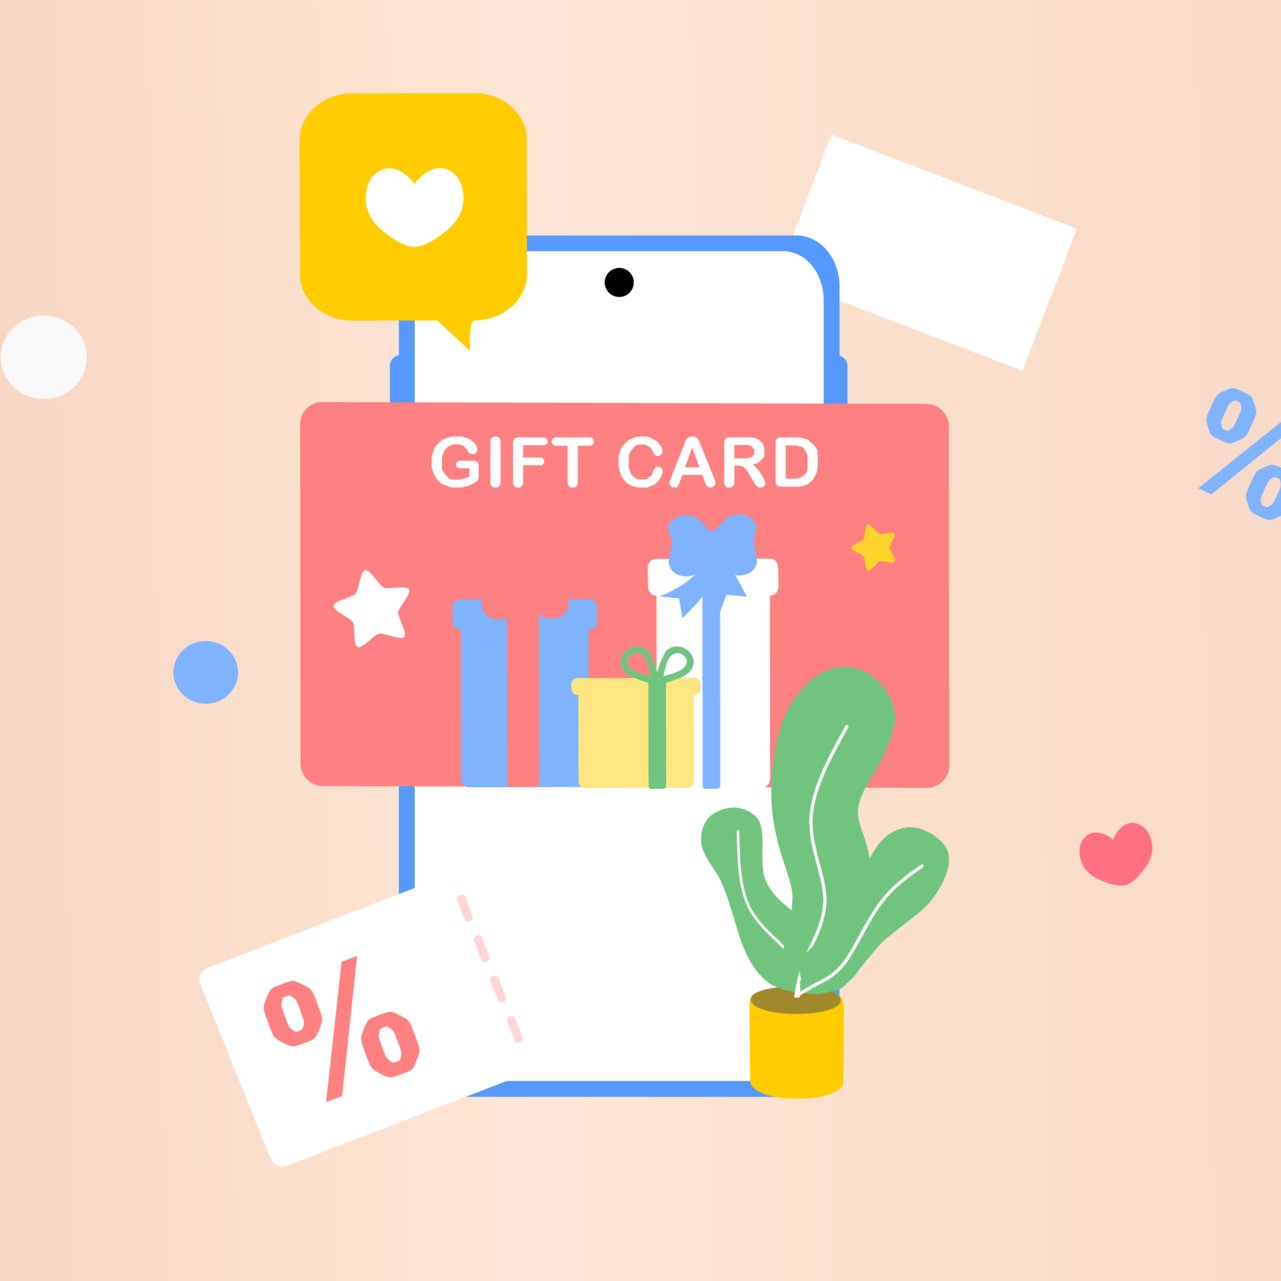 How To Use Gift Card? The Ideal Present When You Don’t Know What To Gift